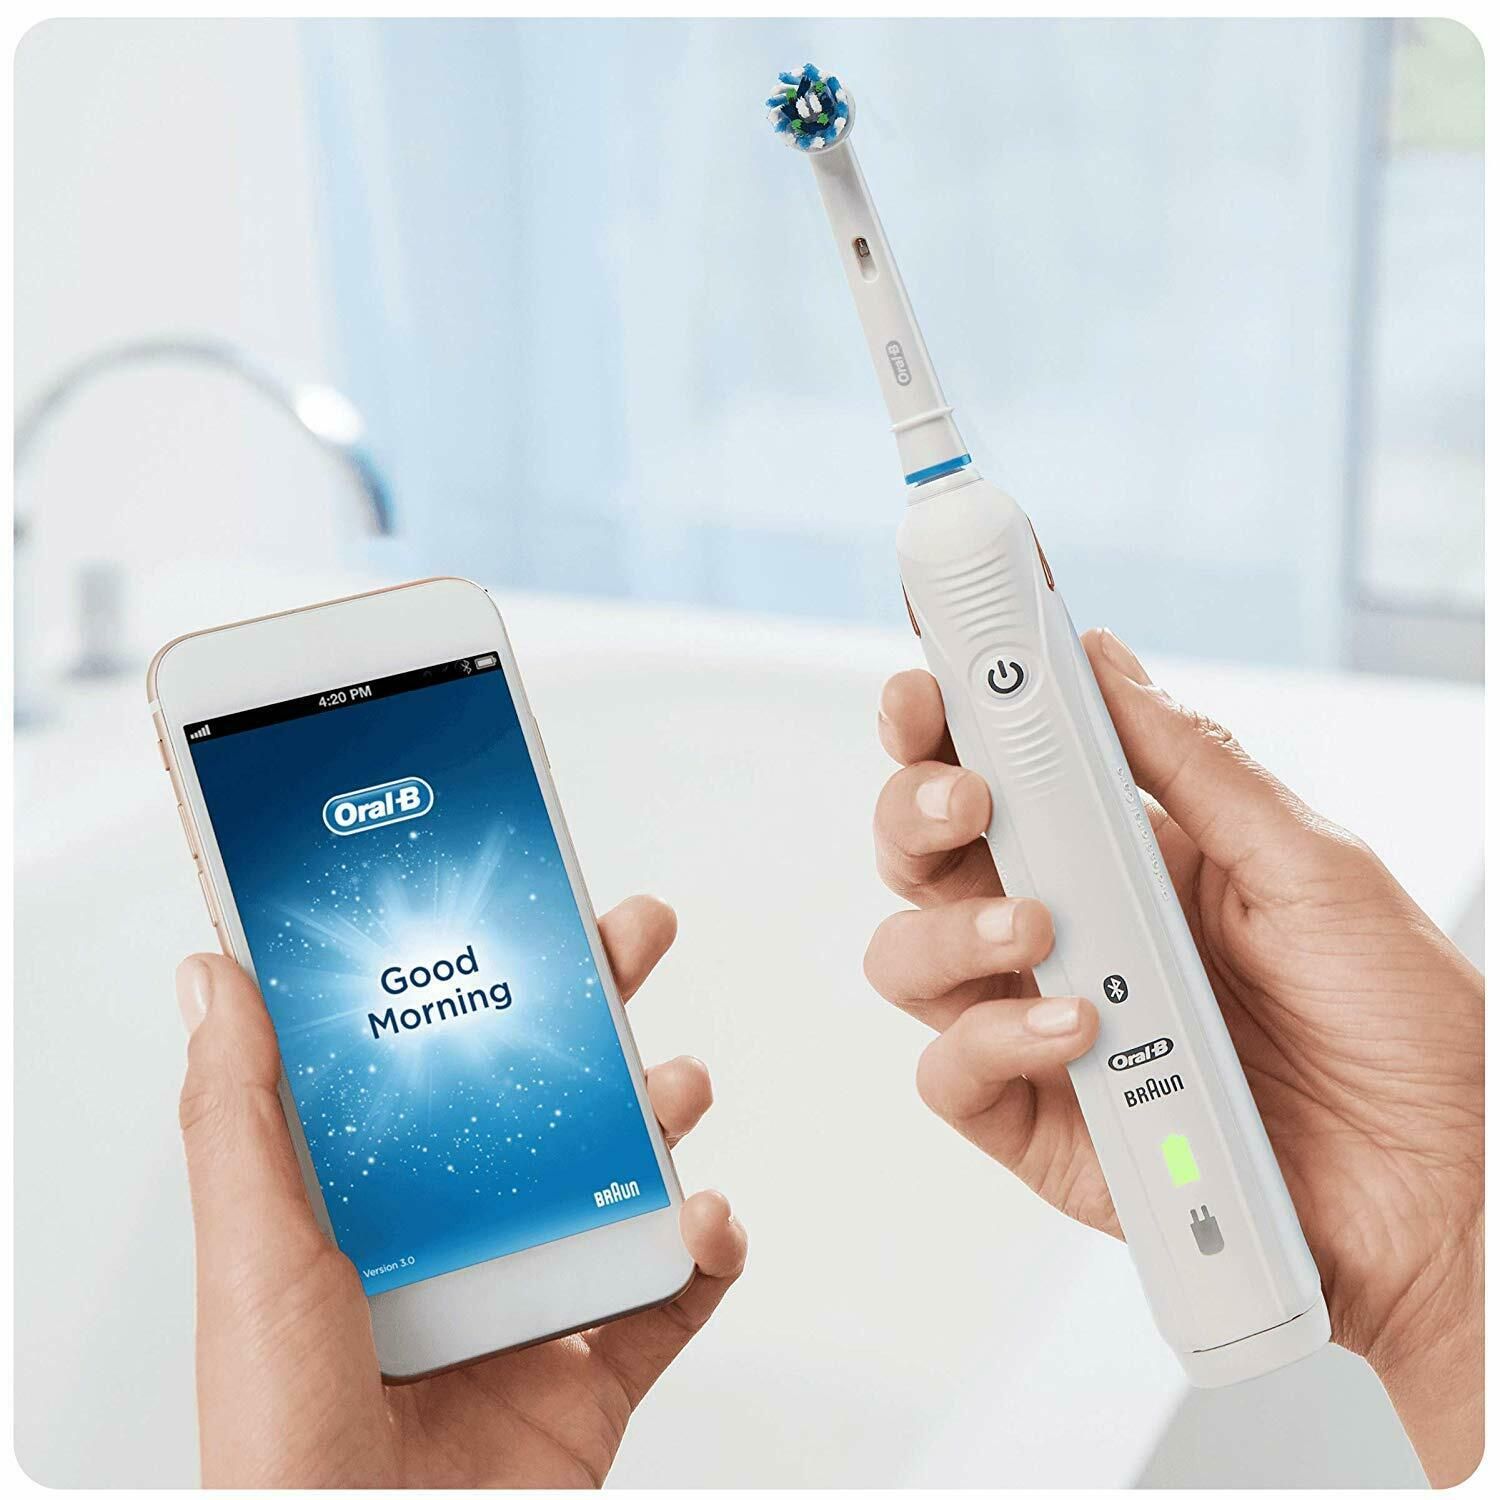 Oral-B Smart 4500N CrossAction Electric 3 Modes Toothbrush With 2 Heads Black

    Experience Oral-B SMART 4, from the brand that brought you the first ever connected rechargeable toothbrush. The sleek handle of the SMART 4 4500N electric toothbrush improves your brushing habits. It seamlessly connects with the Oral-B app in your phone and guides you with real time feedback to brush better. 
    While you are improving your brushing routine, Oral-B's unique round head does all the rest. It removes up to 100 percent more plaque than a standard manual toothbrush for healthier gums and it starts making your smile whiter as of the first day of brushing by removing surface stains. 
    Not only this, but the toothbrush helps you protect your delicate gums with the proprietary pressure control technology that reduces brushing speed and alerts you to be gentler if you brush too hard. With the Smart Coaching, you will improve your brushing habits and your oral health.
    No wonder Oral-B is the N1 recommended brand by dentists worldwide. Compatible with the following replacement toothbrush heads: Cross Action, 3D White, Sensi Ultrathin, Sensitive Clean, Precision Clean, Floss Action, Tri Zone, Dual Clean, Power Tip, Ortho Care.

Key Features :

    Up to 100 Percent more plaque removal: Round head cleans better for healthier gums.
    Better brushing results with real-time feedback as you brush.
    Protect your gums: Pressure sensor alerts you if you brush too hard.
    Gently whitens your teeth starting from day 1 by removing surface stains.
    Battery lasts more than 2 weeks with one charge.
    Know you brush the right amount of time with the 2 minutes professional timer.
    Three brushing modes including daily clean, whitening and sensitive.
    Include: One black handle with charger, 2 x brush head, one free travel case.

The professionally inspired design of the toothbrush head surrounds each tooth and the dynamic movement of 3D cleaning action adapts to your teeth as it oscillates, rotates, and pulsates to break up and remove up to 100% more plaque than a regular manual toothbrush.

Free Travel Case
A limited edition travel case is included in the pack.
	
Pressure Sensor
The Visible Pressure Sensor on the PRO 4500 electric toothbrush lights up to alert you when you are brushing too hard. Applying too much pressure can lead to harmful over-brushing, making the pressure sensor an ideal feature for better brushing.
	
Pro Timer
A helpful on-handle timer buzzes every 30 seconds to let you know when it�s time to focus on brushing the next quadrant of your mouth. The electric toothbrush also alerts you when you have brushed for the dentist-recommended time of 2 minutes.


Not Available for the following postcodes:
AB, BT, DB99, DD9-11, EH35-46, FK18-21, AB, BT, DB99, GY, HS, IM, IV, KA27, KA28, KW, KY9-16, PA, PH, PO30-41, TD, TR21-25, ZE